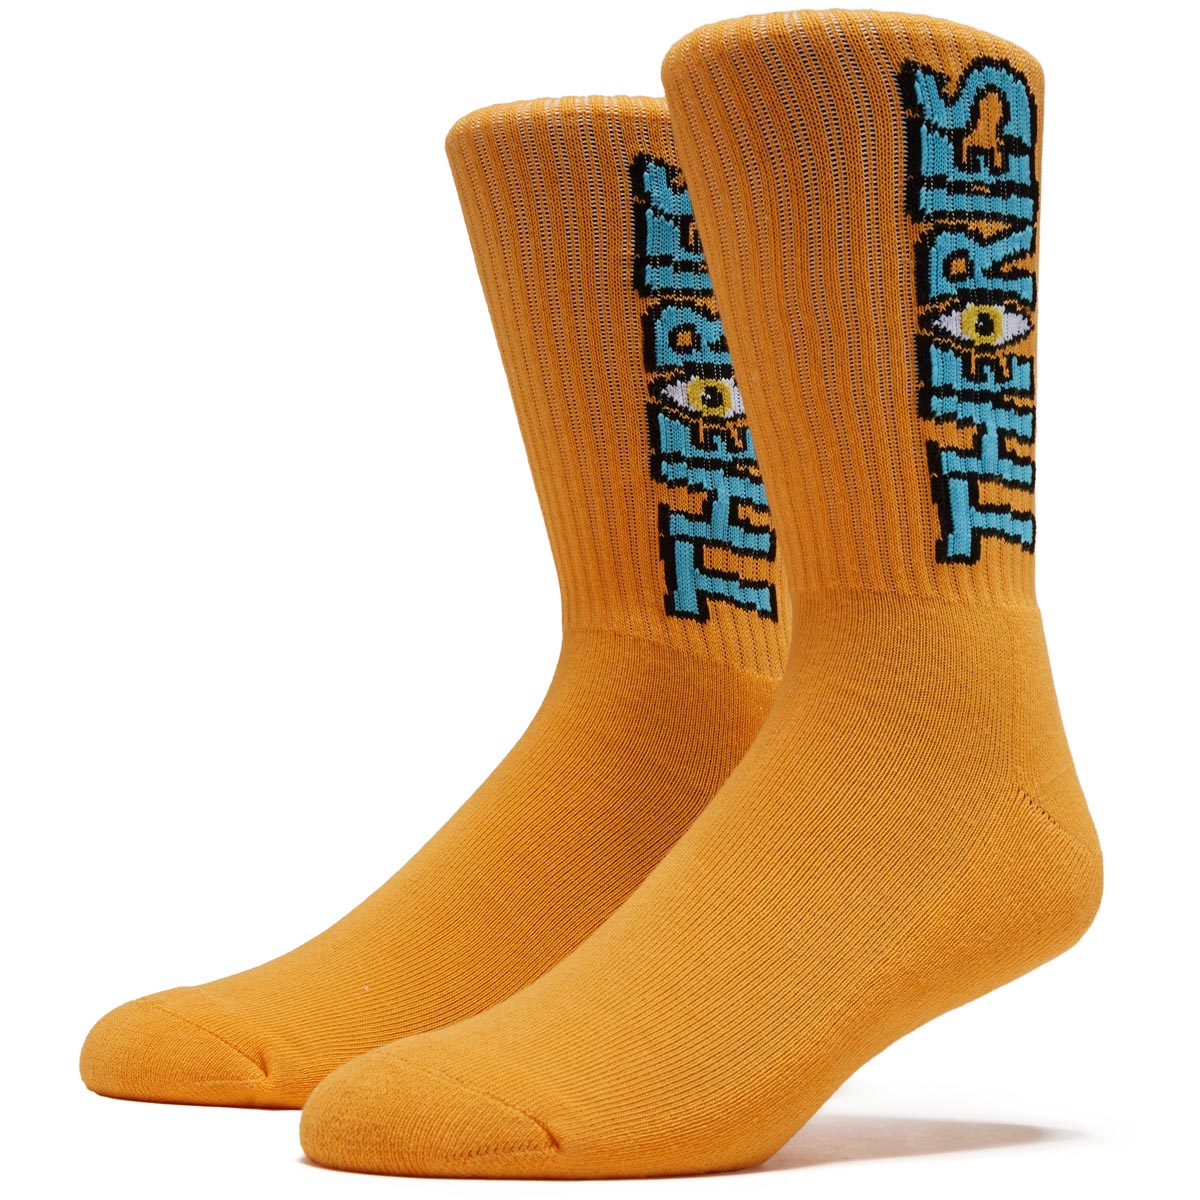 Theories That's Life Socks - Gold image 1